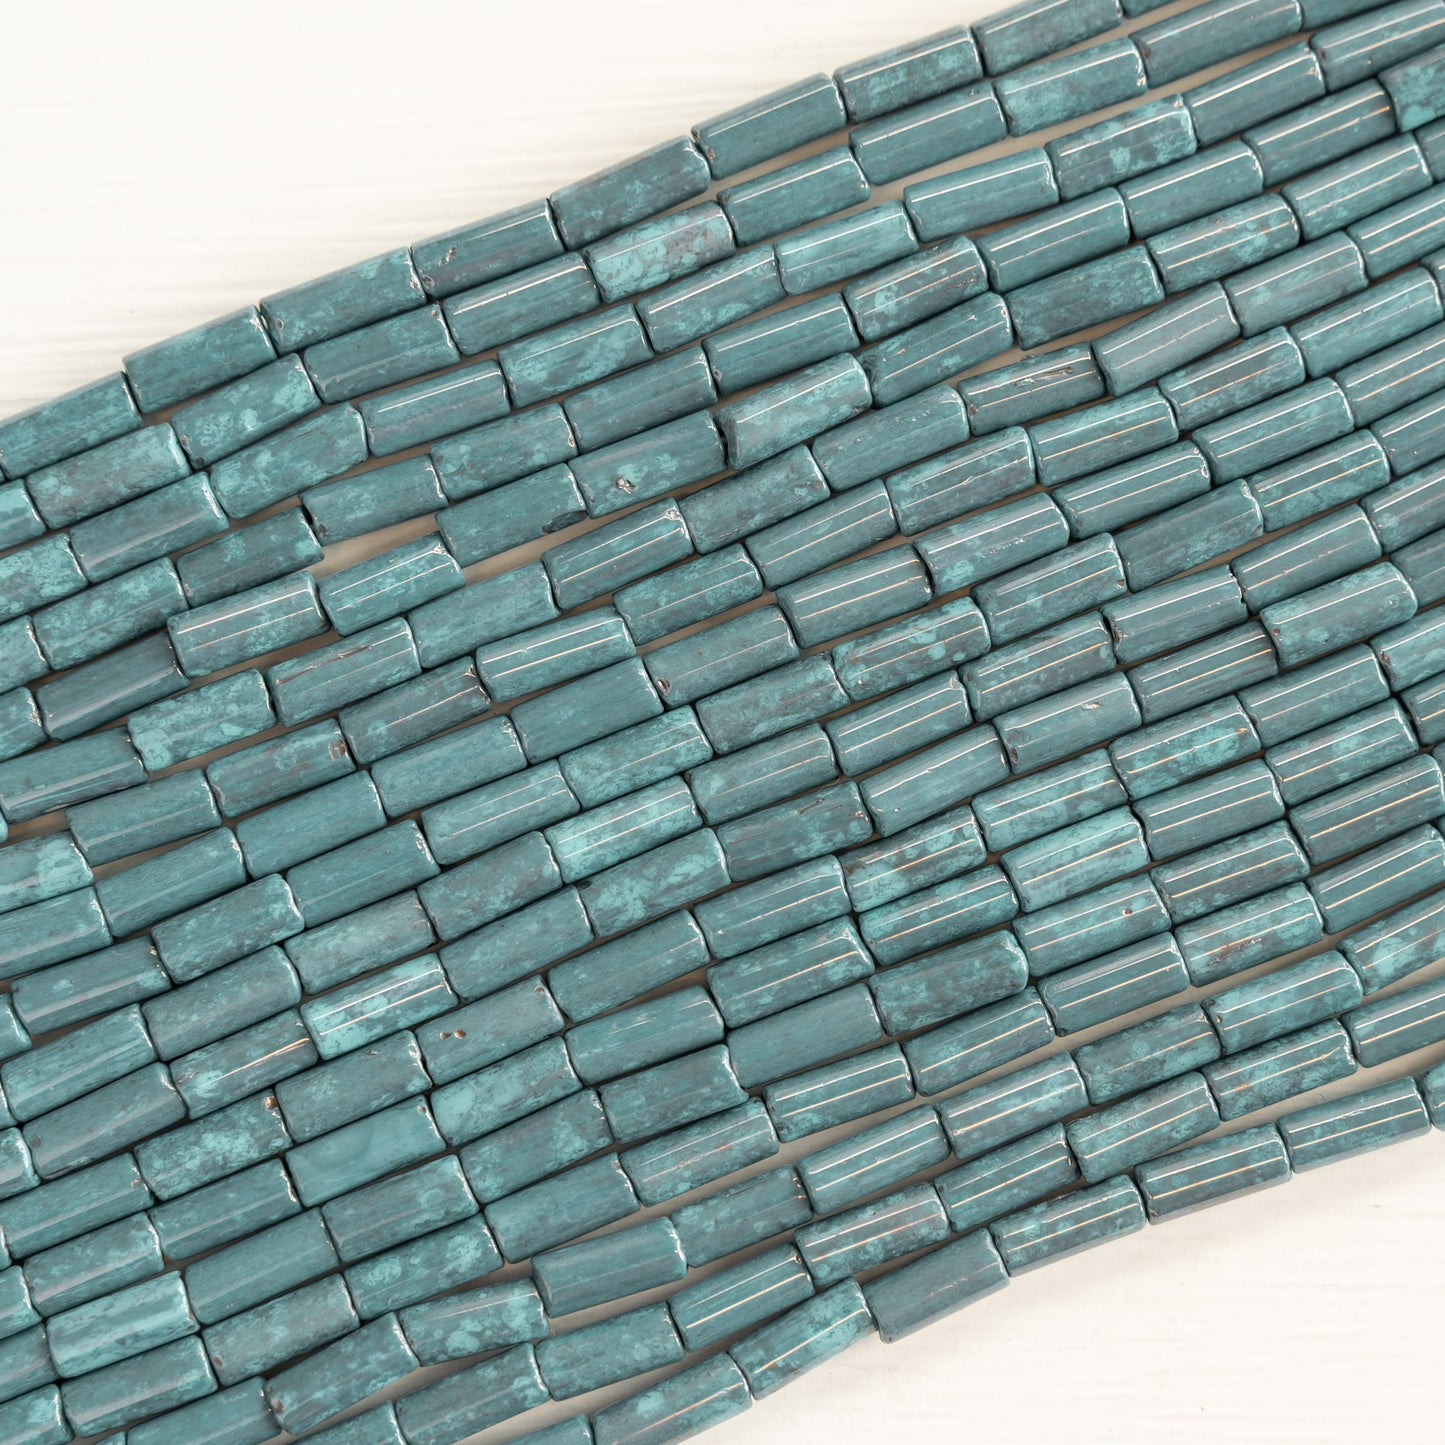 9x4mm Glass Tube Beads - Mottled Teal - 20 or 60 Inches